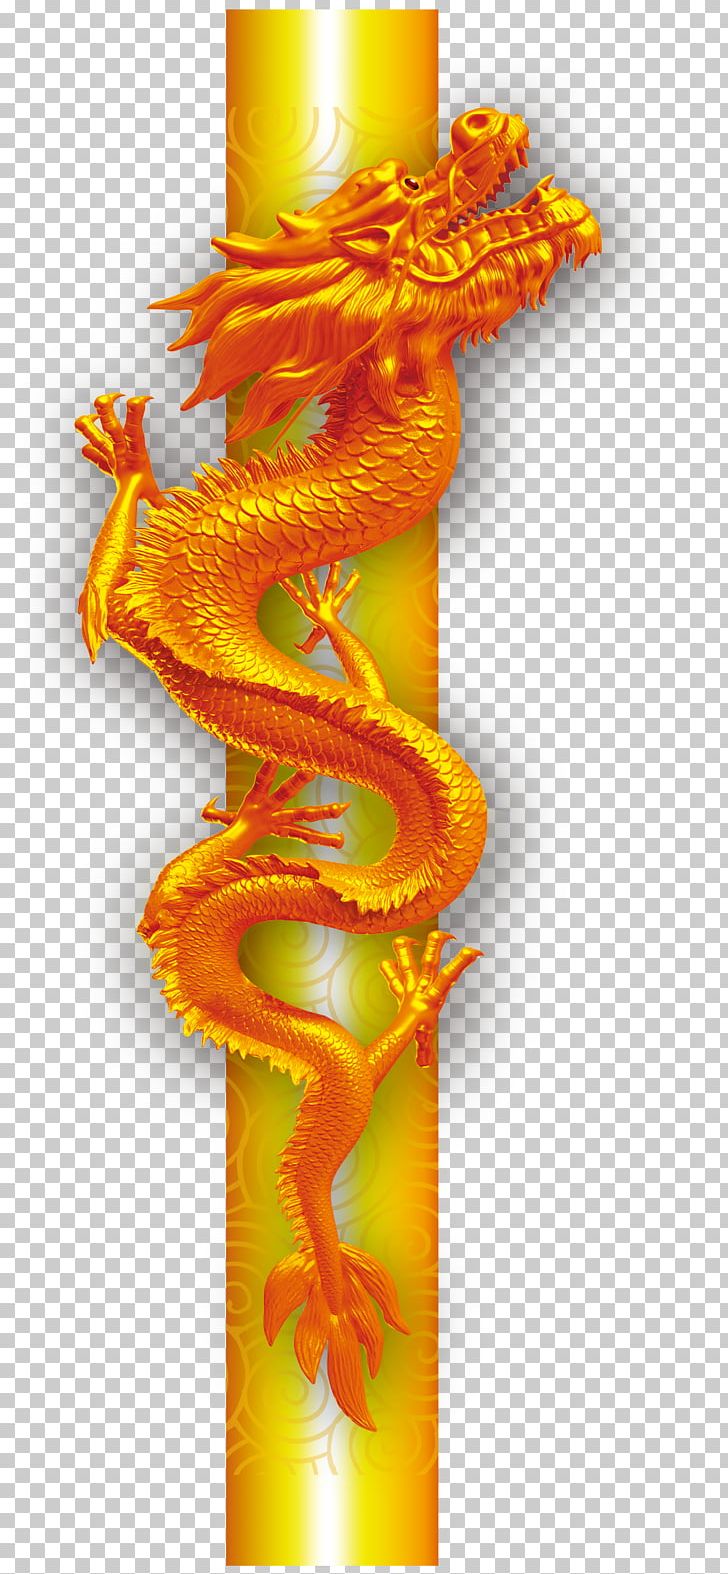 Column Chinese Dragon PNG, Clipart, Background, Chinese, Chinese Border, Chinese Dragon, Chinese Lantern Free PNG Download